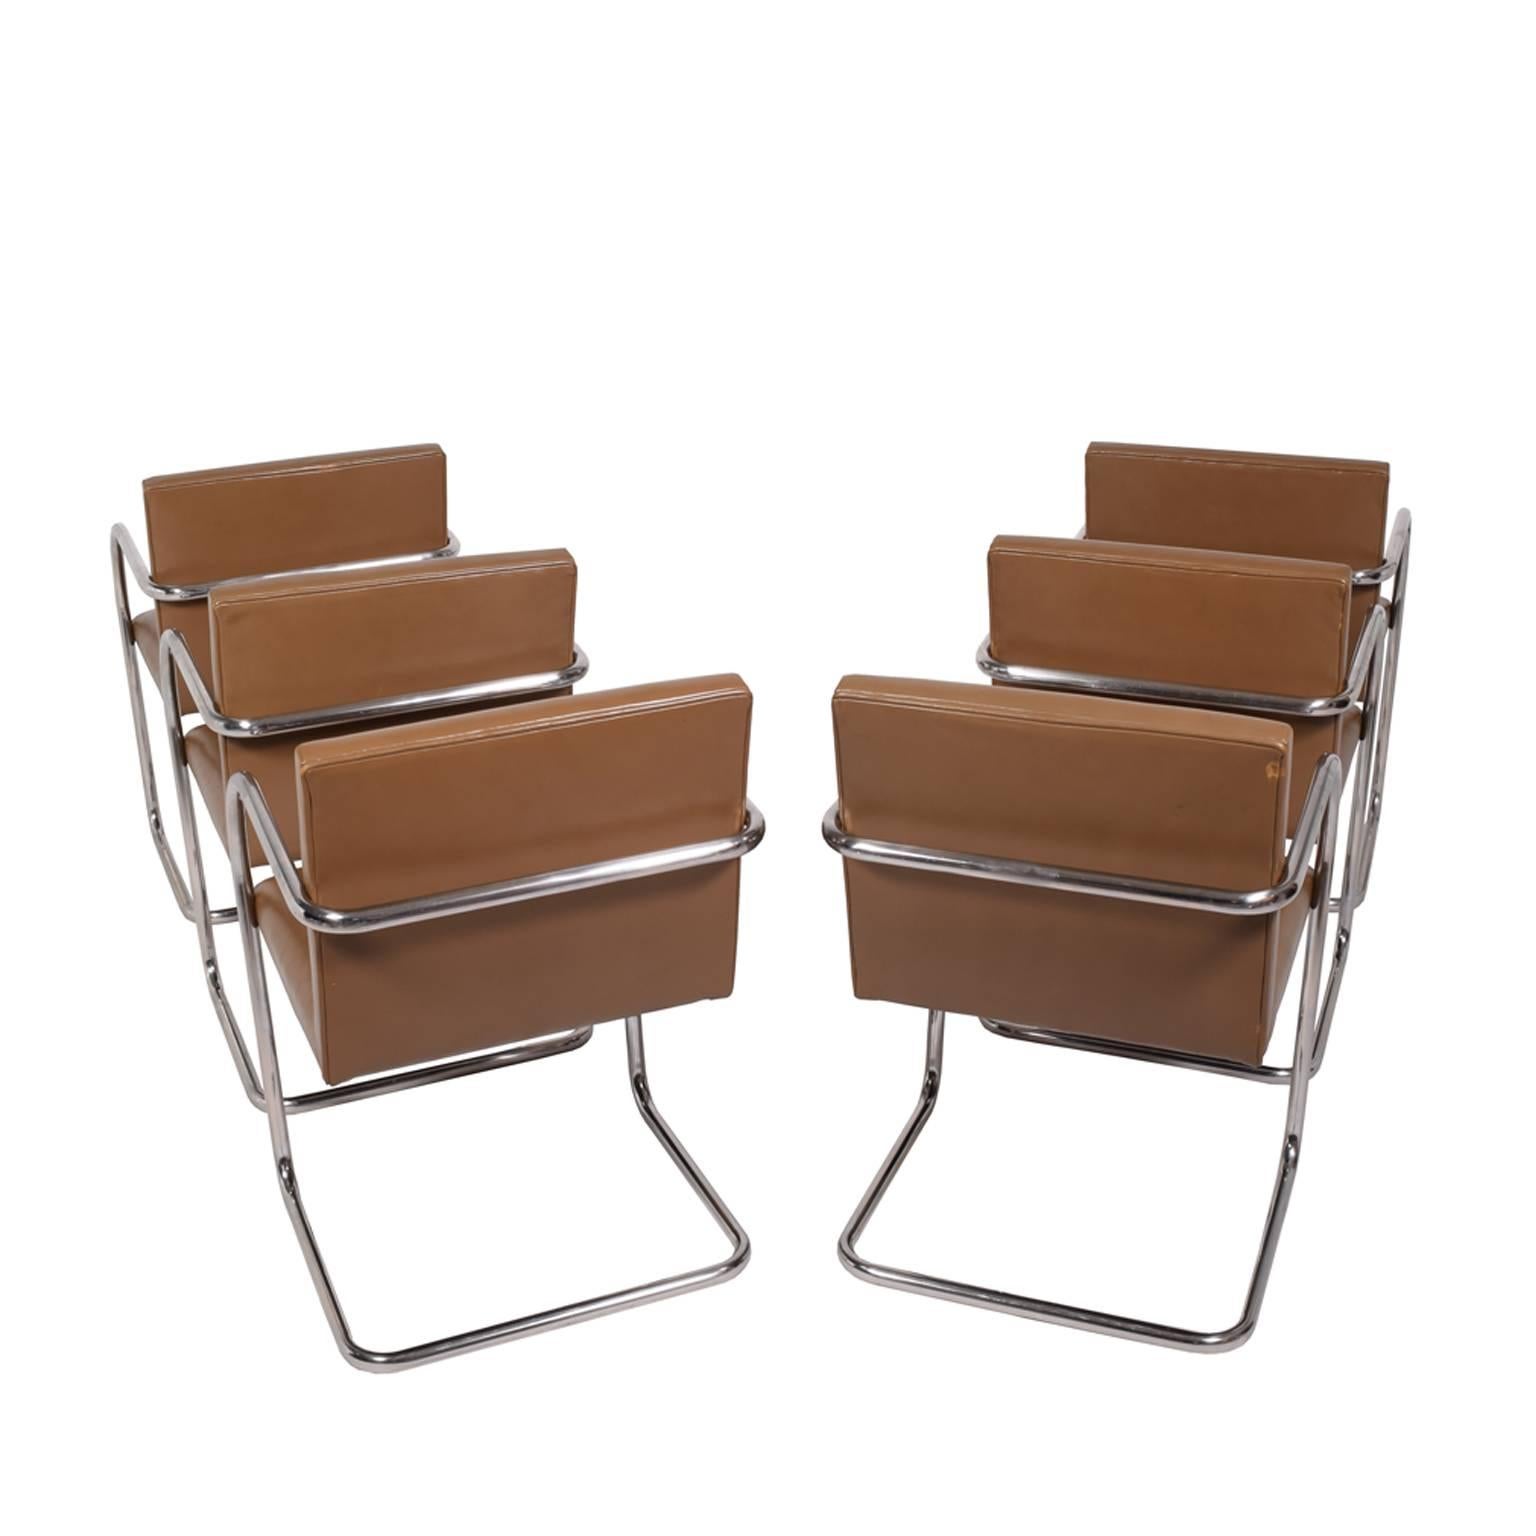 Six stainless steel Classic tubular Brno chairs, previously reupholstered in leather.
Made by Knoll.
Arm height 25.75".